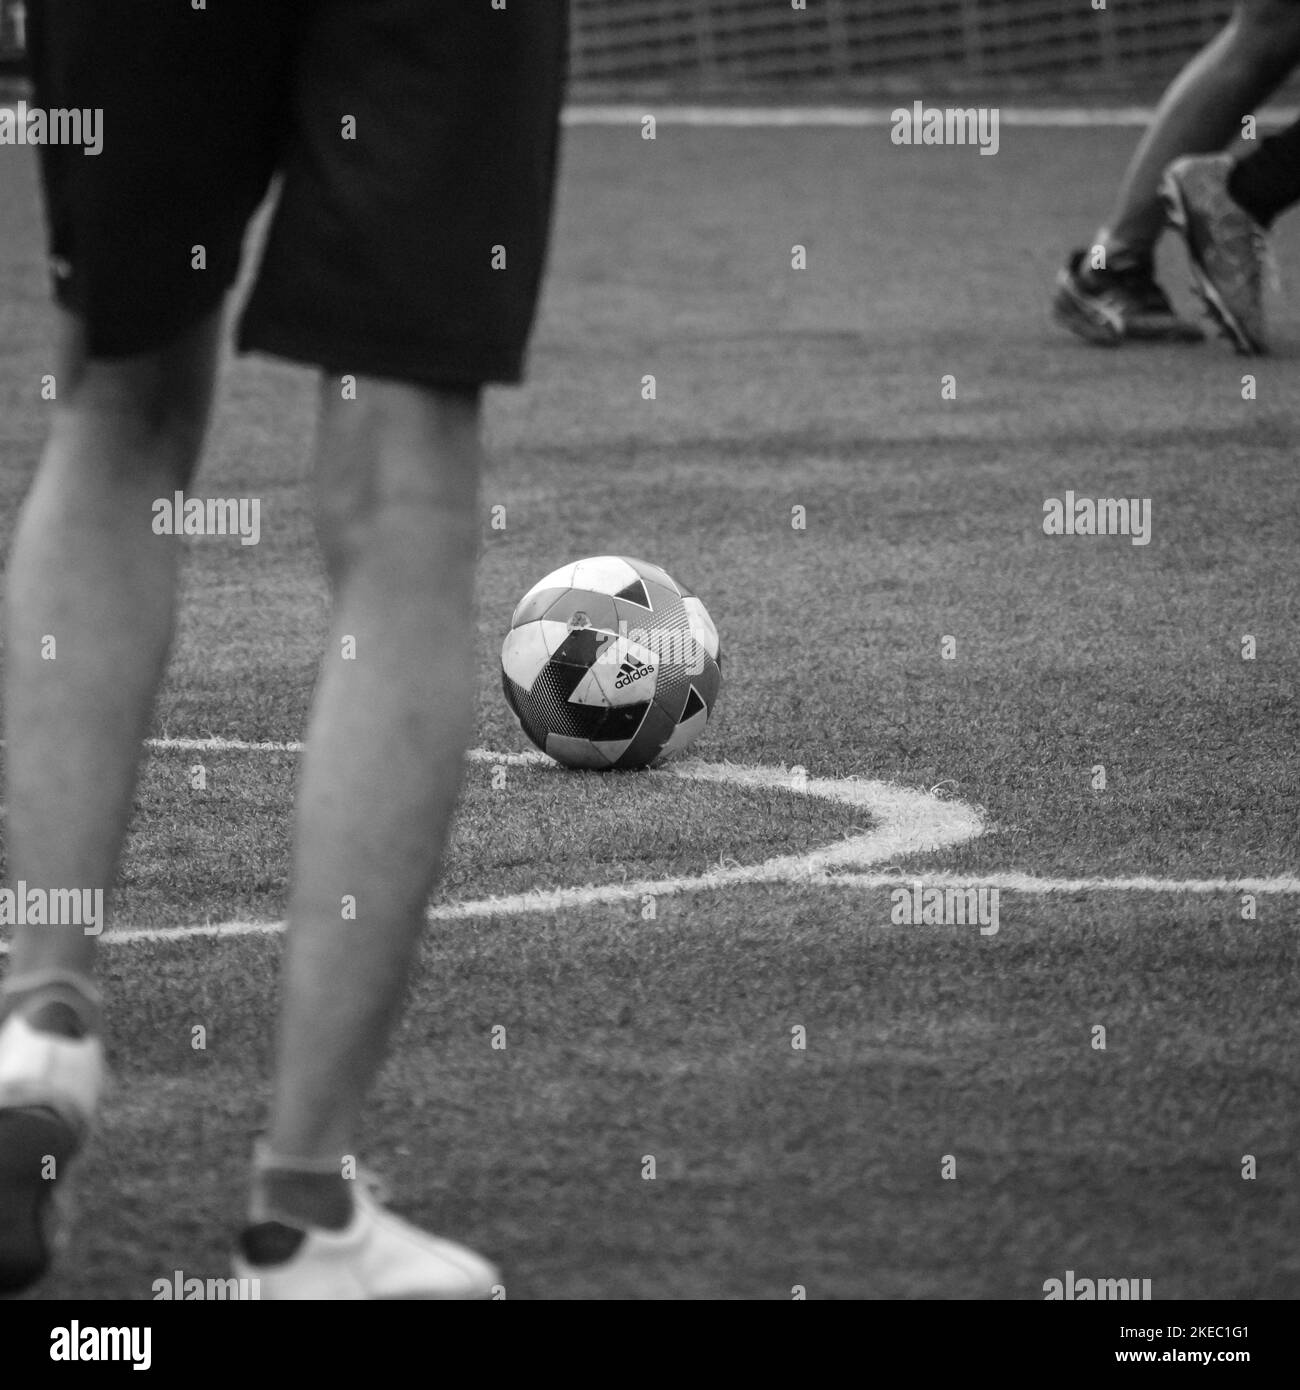 New Delhi, India - July 01 2018: The official adidas football during the championship League, Adidas football in the middle of fields Stock Photo